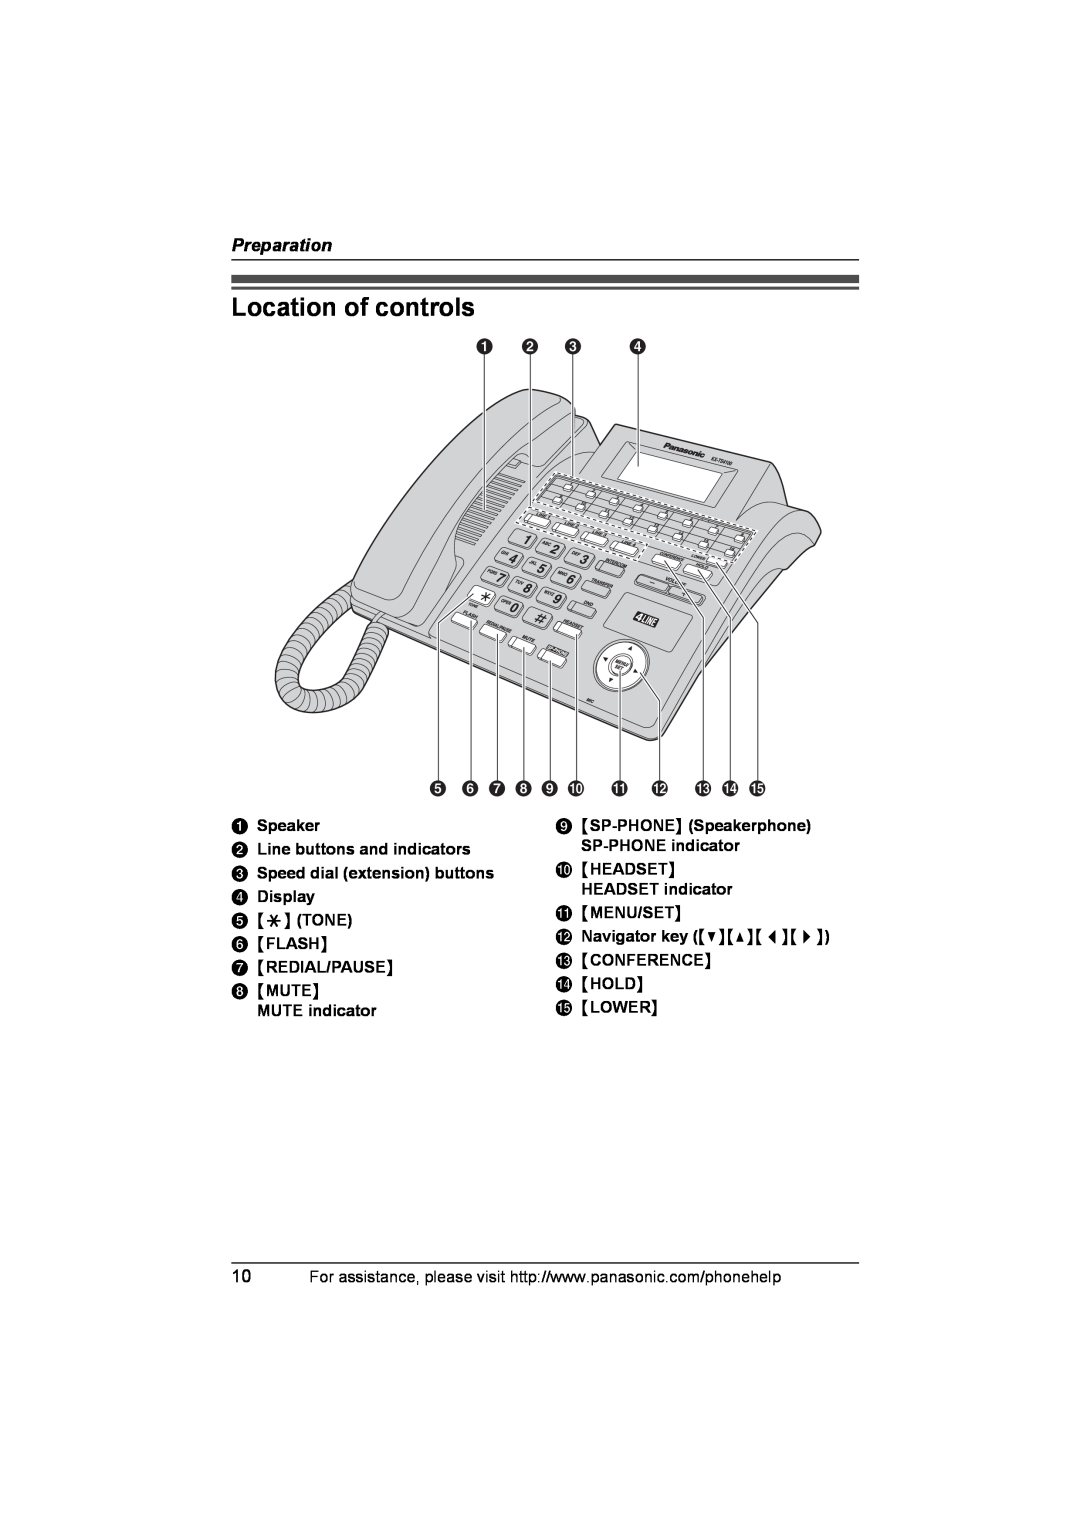 Panasonic KX-TS4100 Location of controls, A Speaker B Line buttons and indicators, G REDIAL/PAUSE H MUTE MUTE indicator 